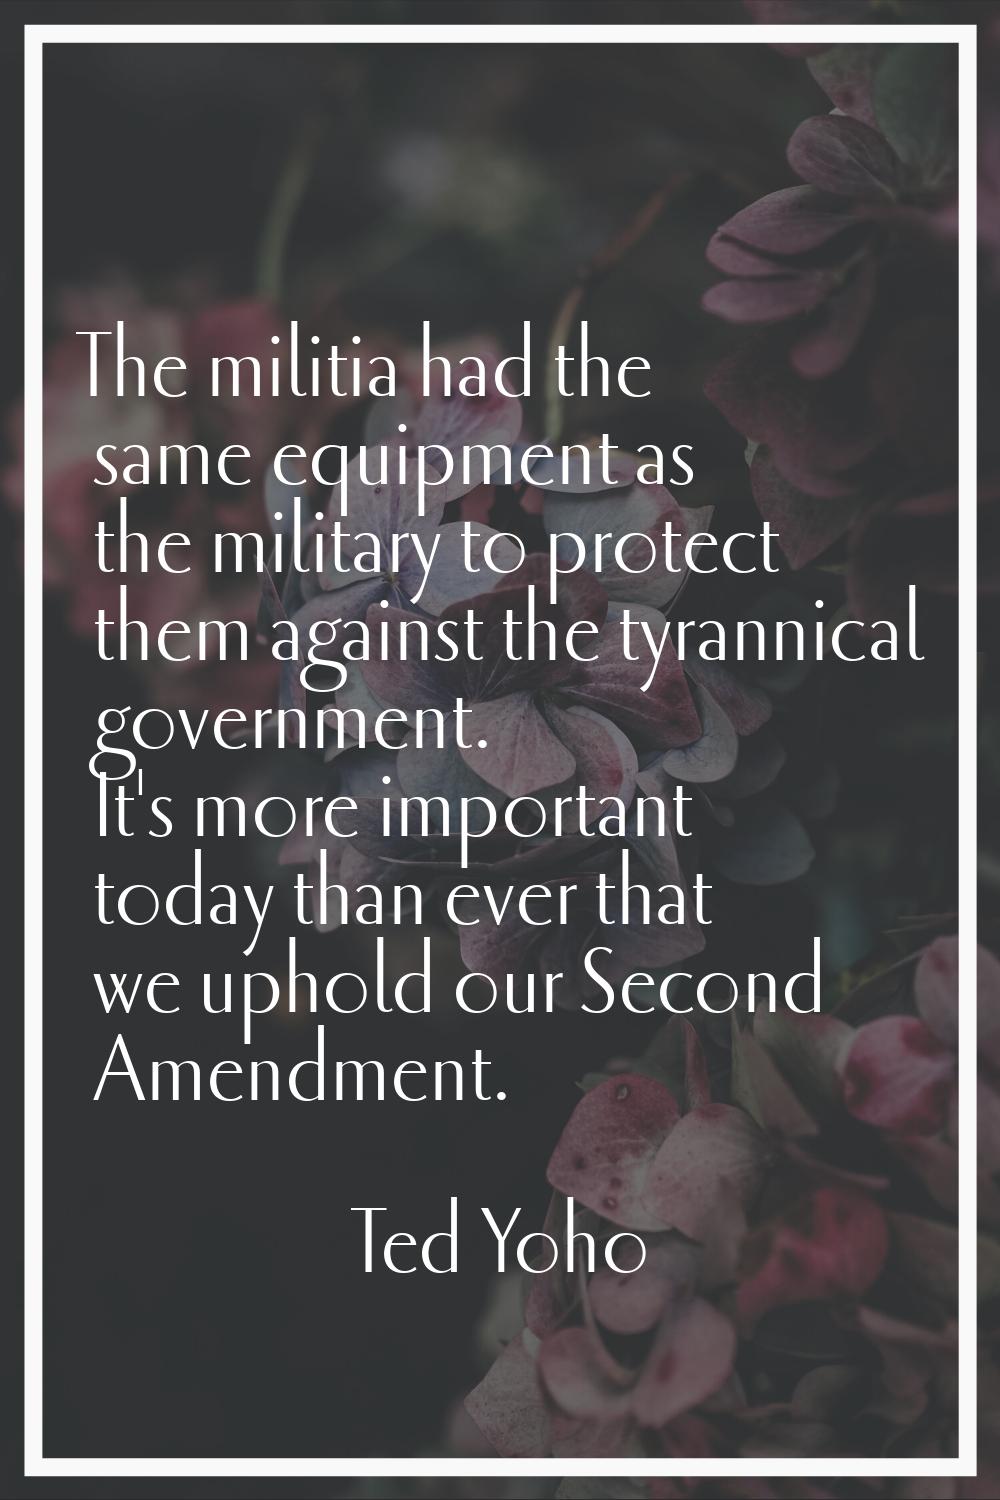 The militia had the same equipment as the military to protect them against the tyrannical governmen